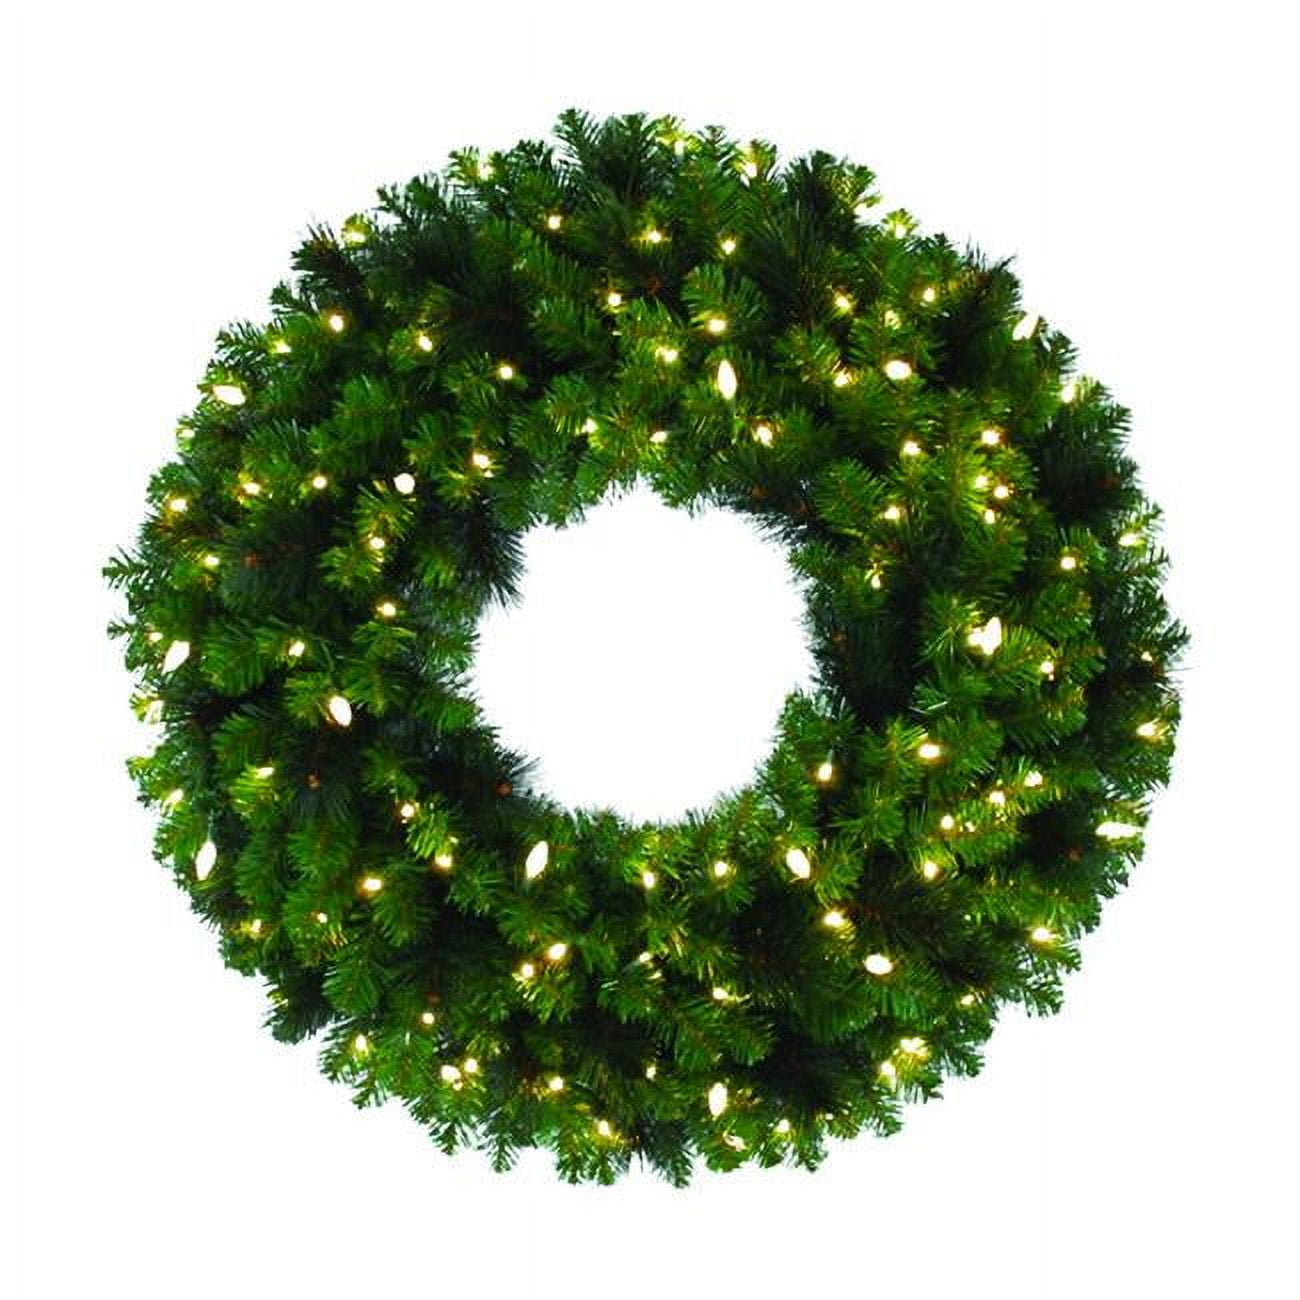 Picture of Celebrations 9016959 36 in. Dia. Mixed Pine Prelit LED Decorated Wreath, Warm White - Case of 2